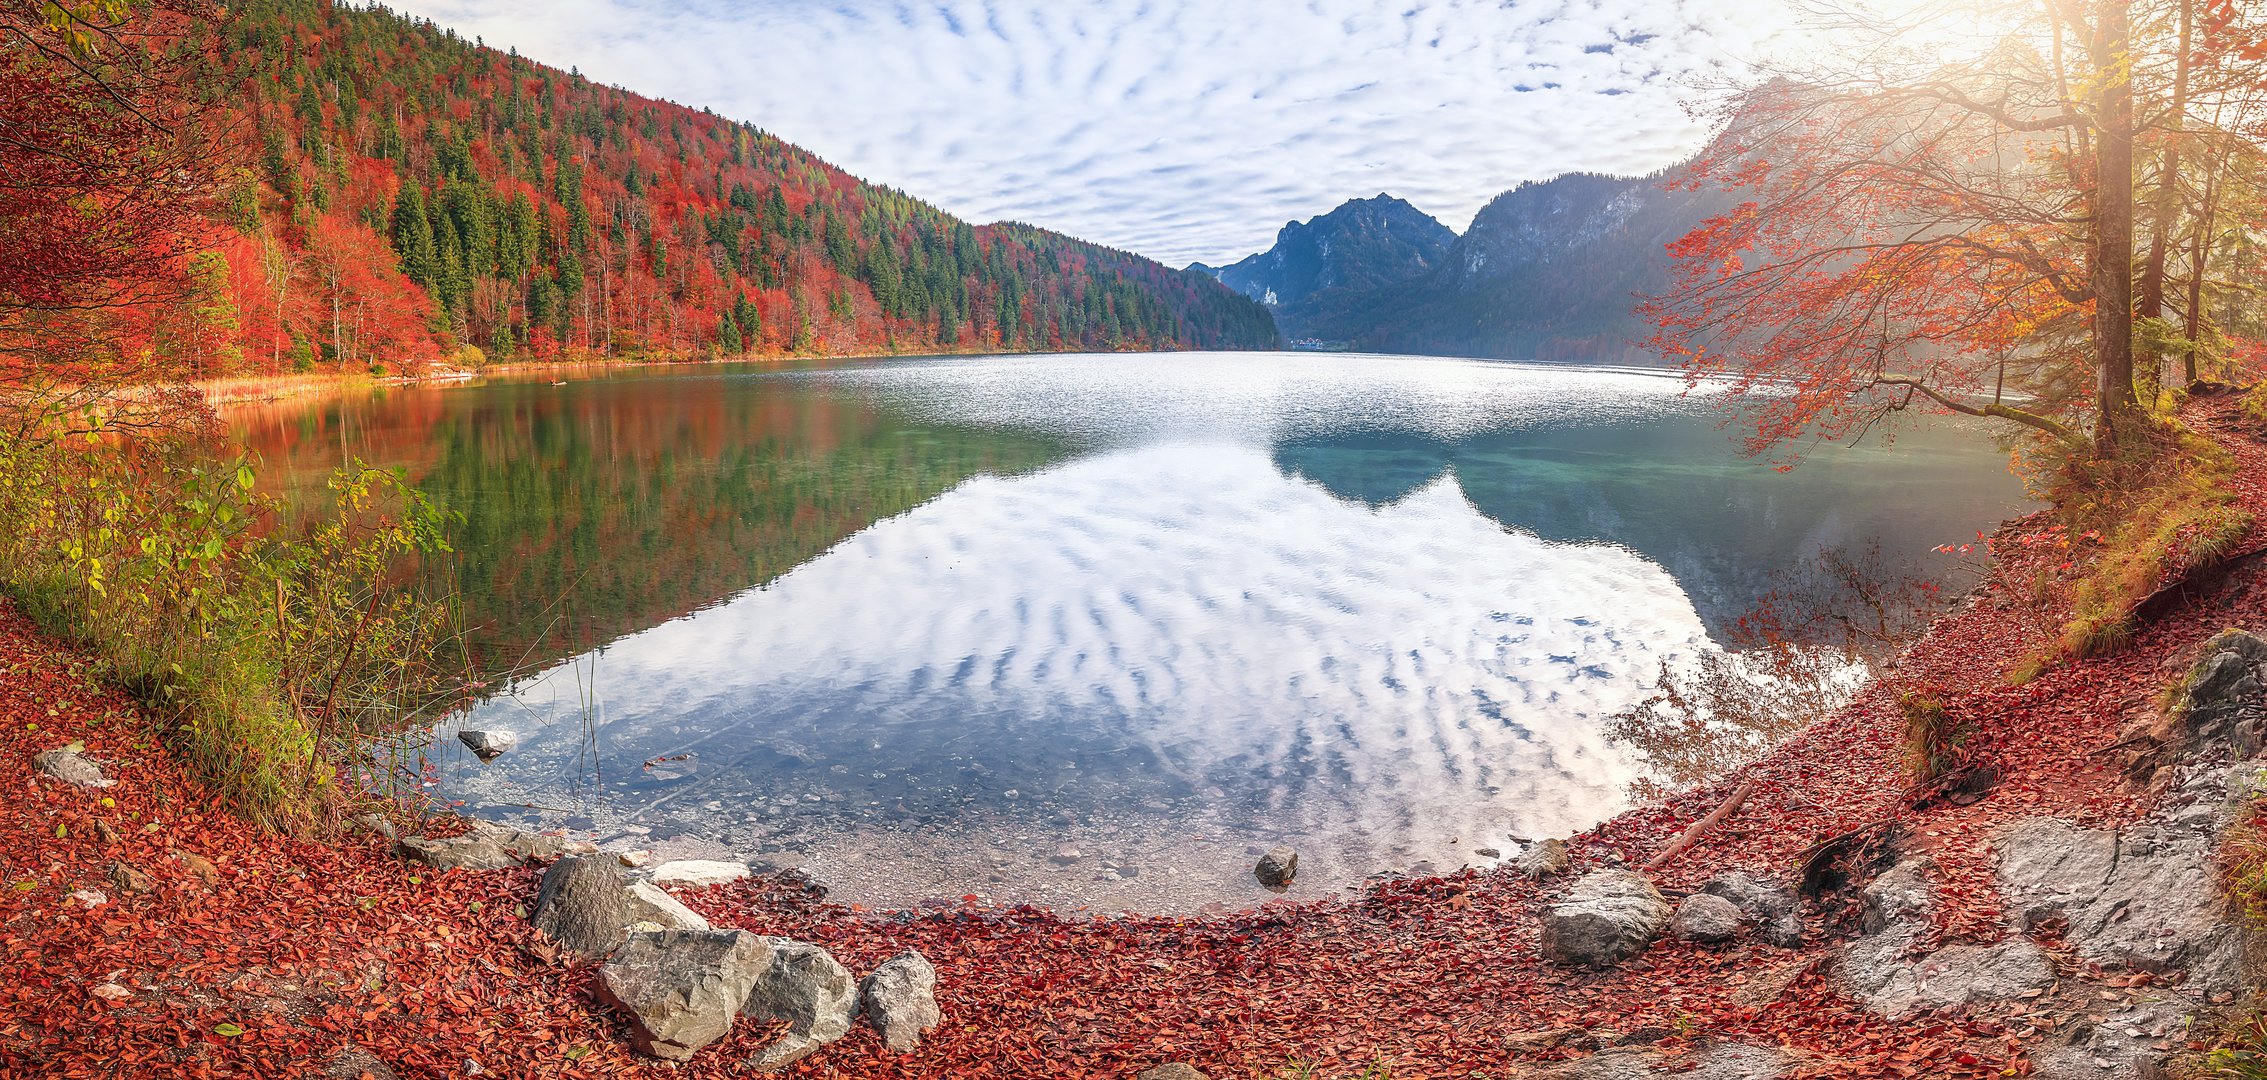 Alpsee lake in autumn colors